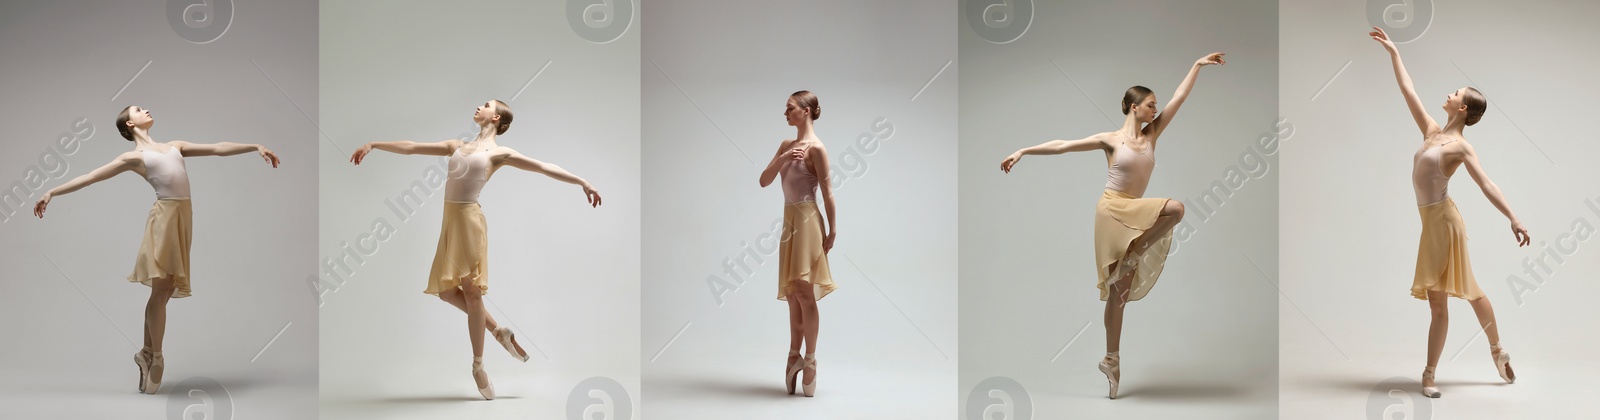 Image of Ballerina practicing dance moves on grey background, set of photos